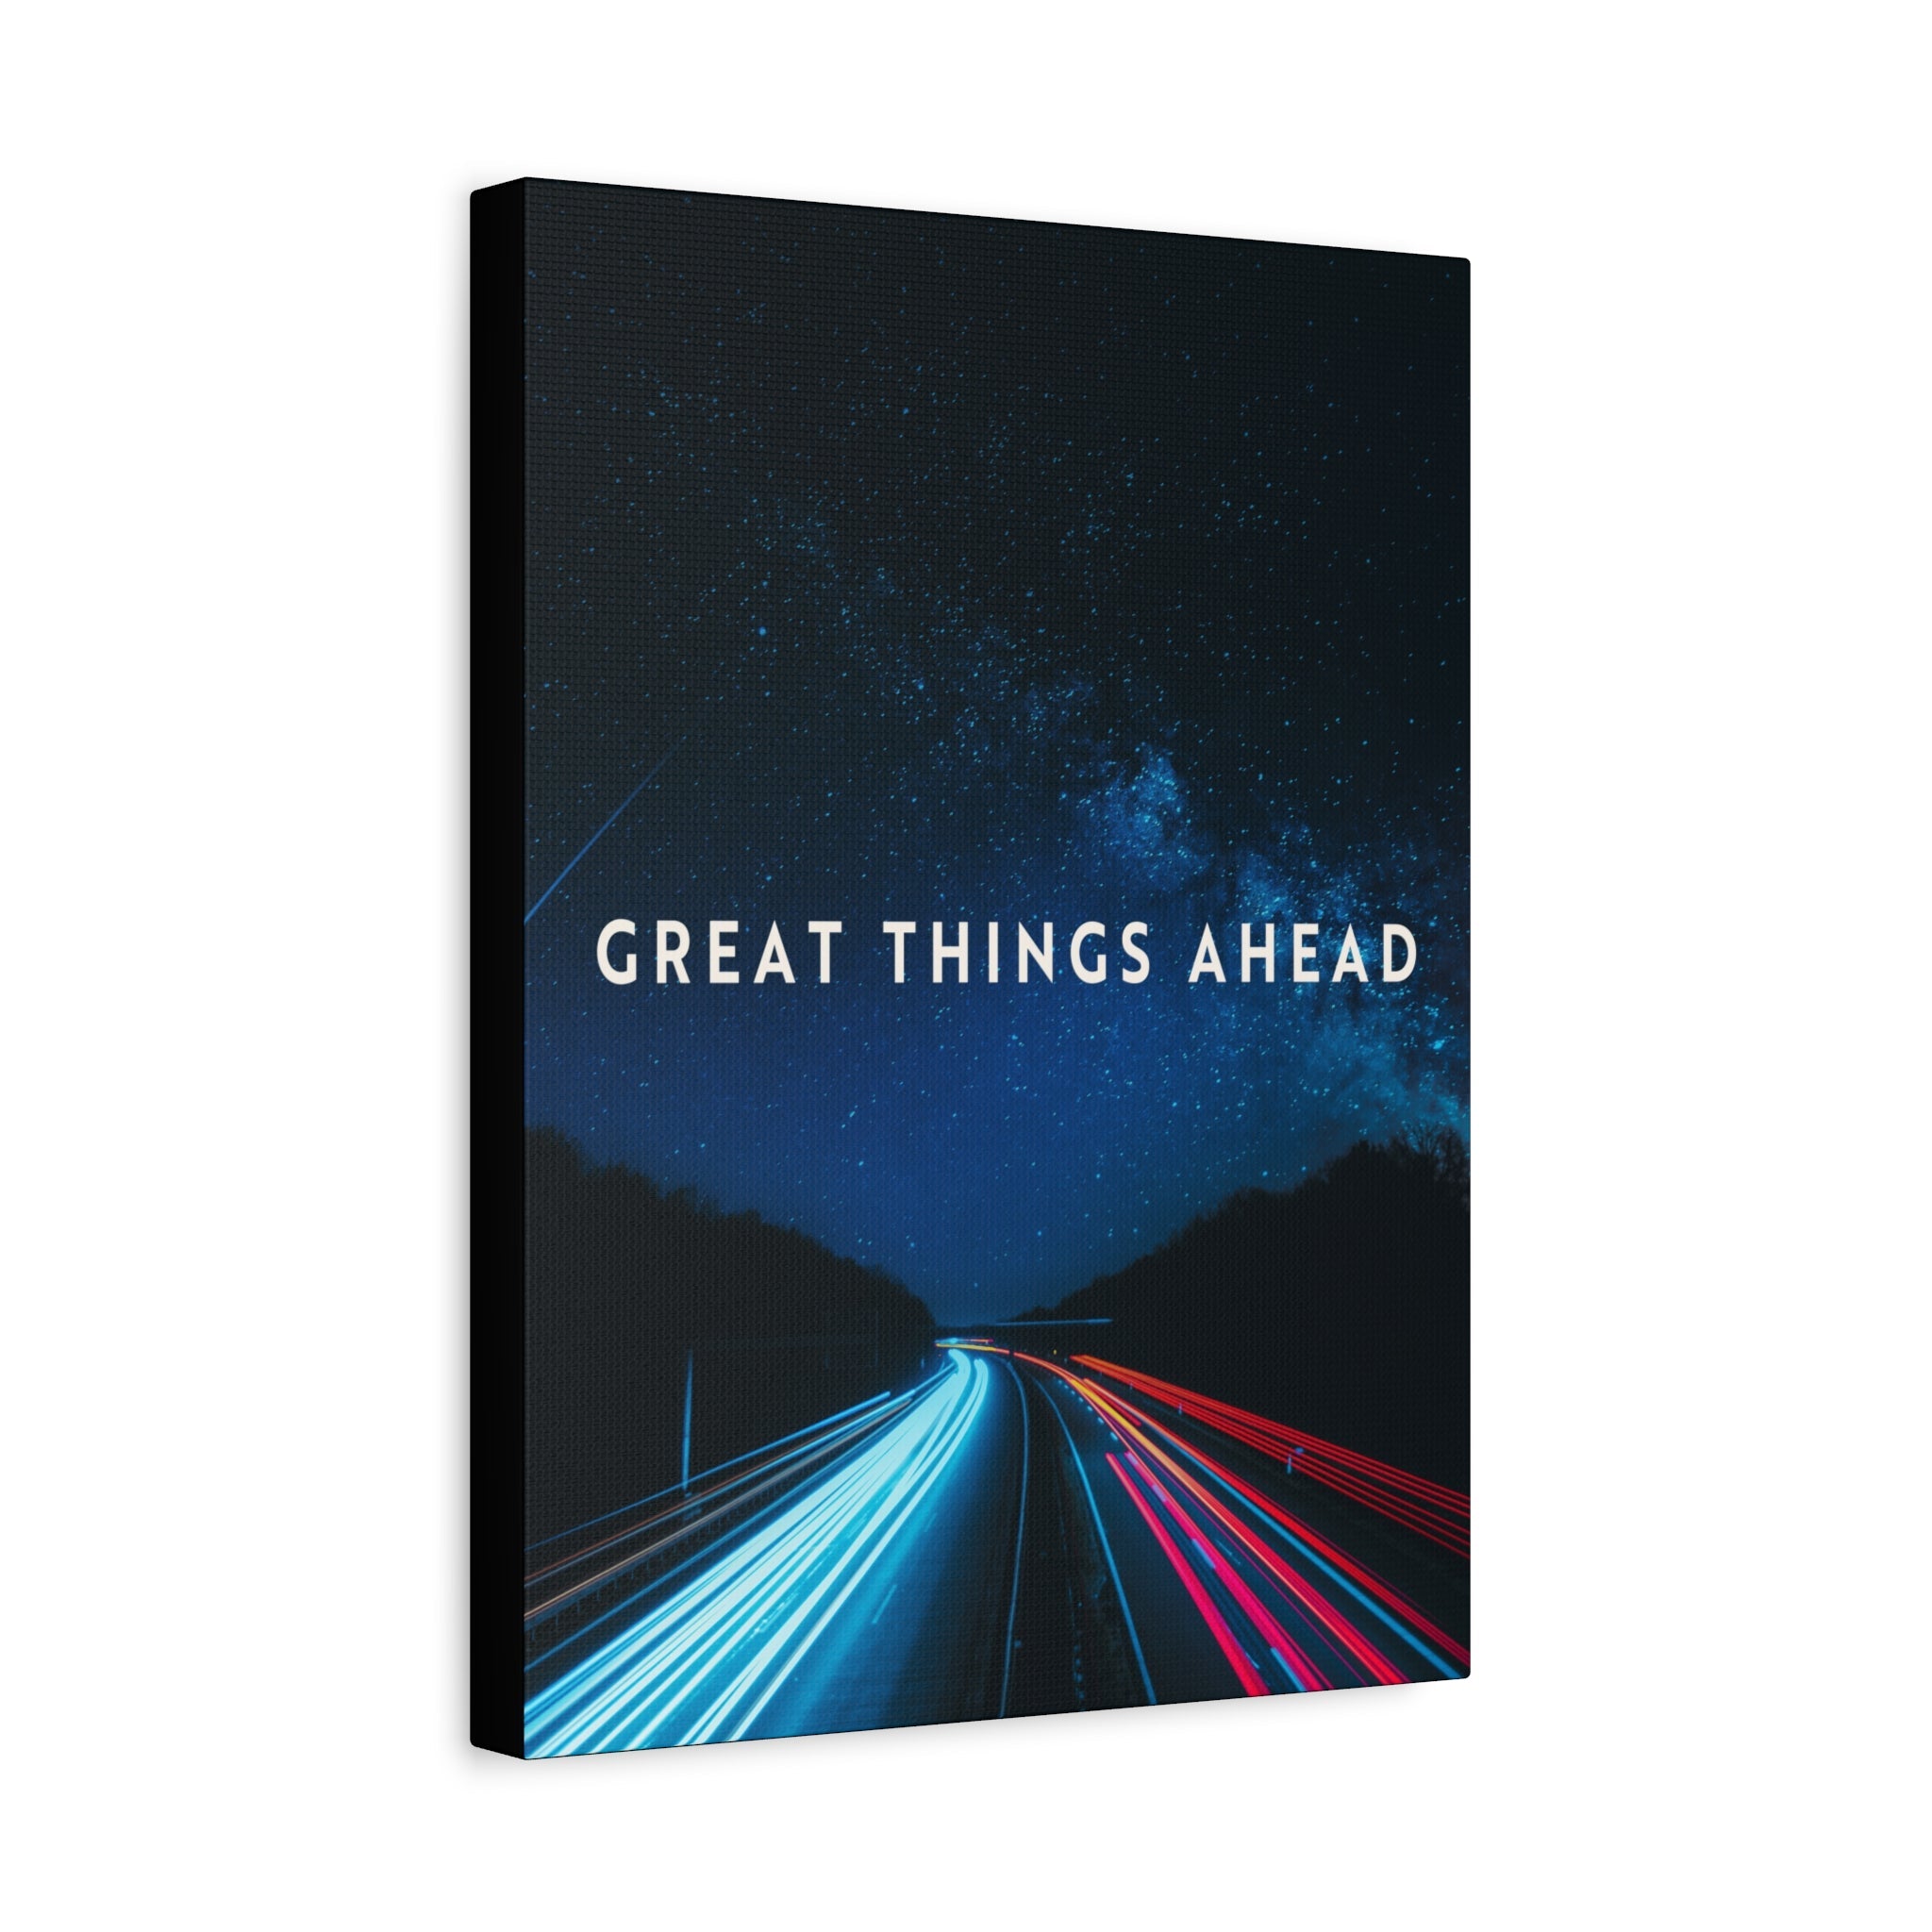 Great Things Ahead - Night Sky - Wall Art additional image 1